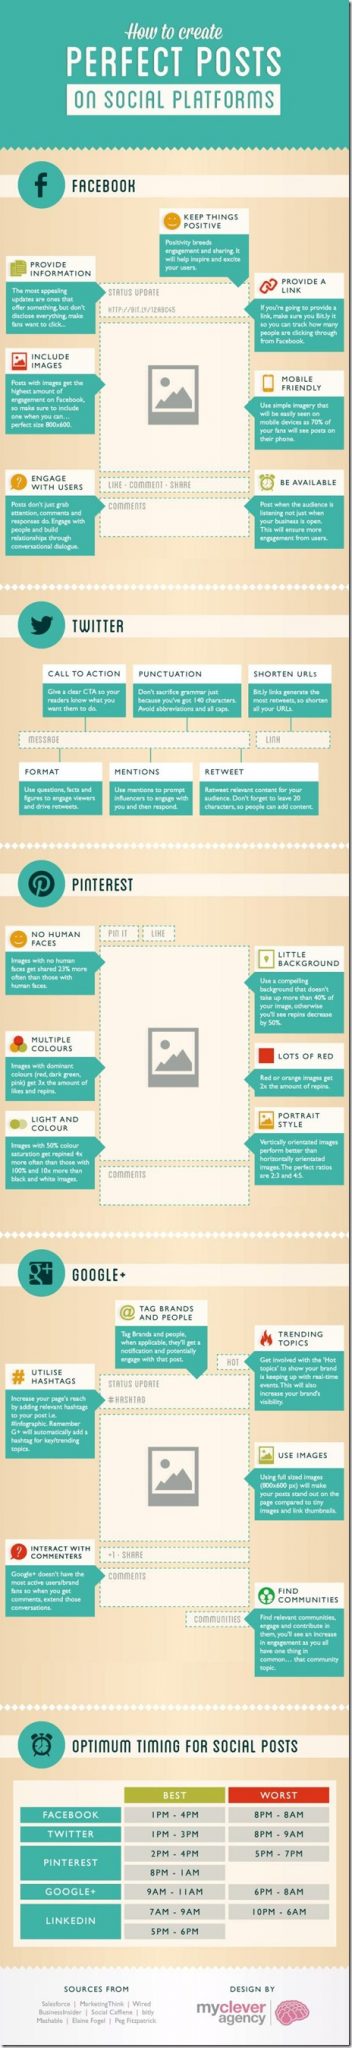 How to create perfect posts on Social Media Platforms